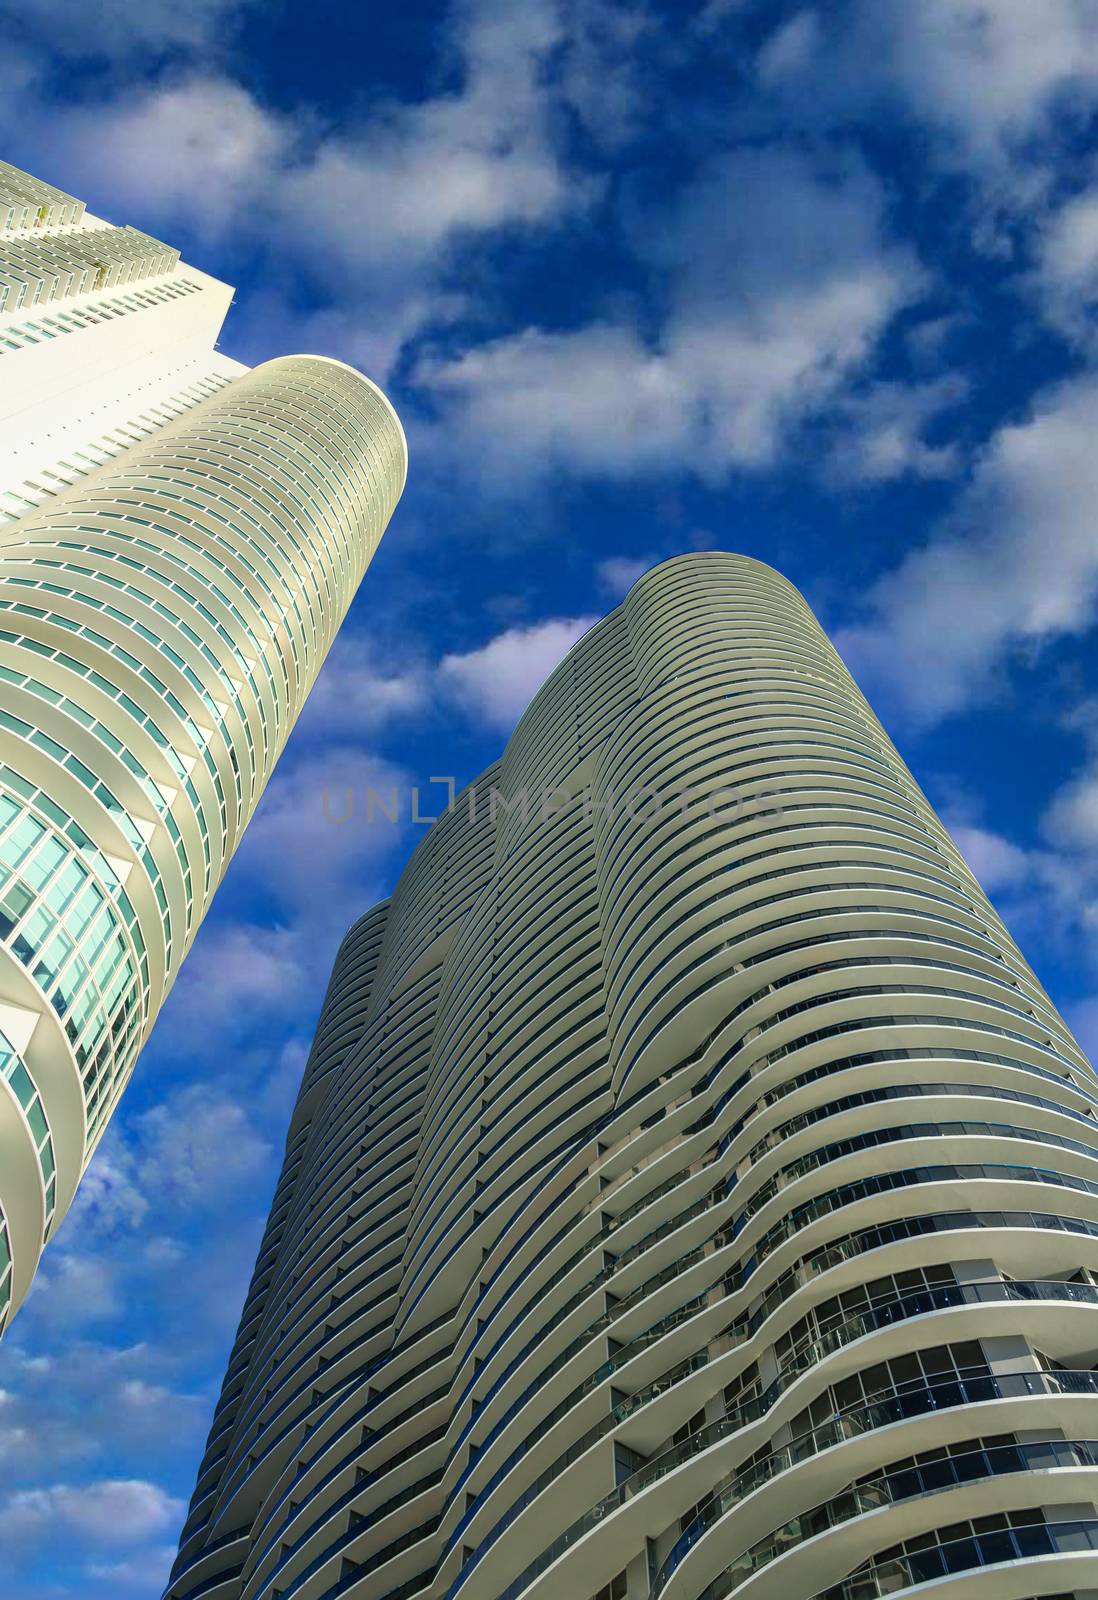 Two Miami Hotel Towers From Below by dbvirago